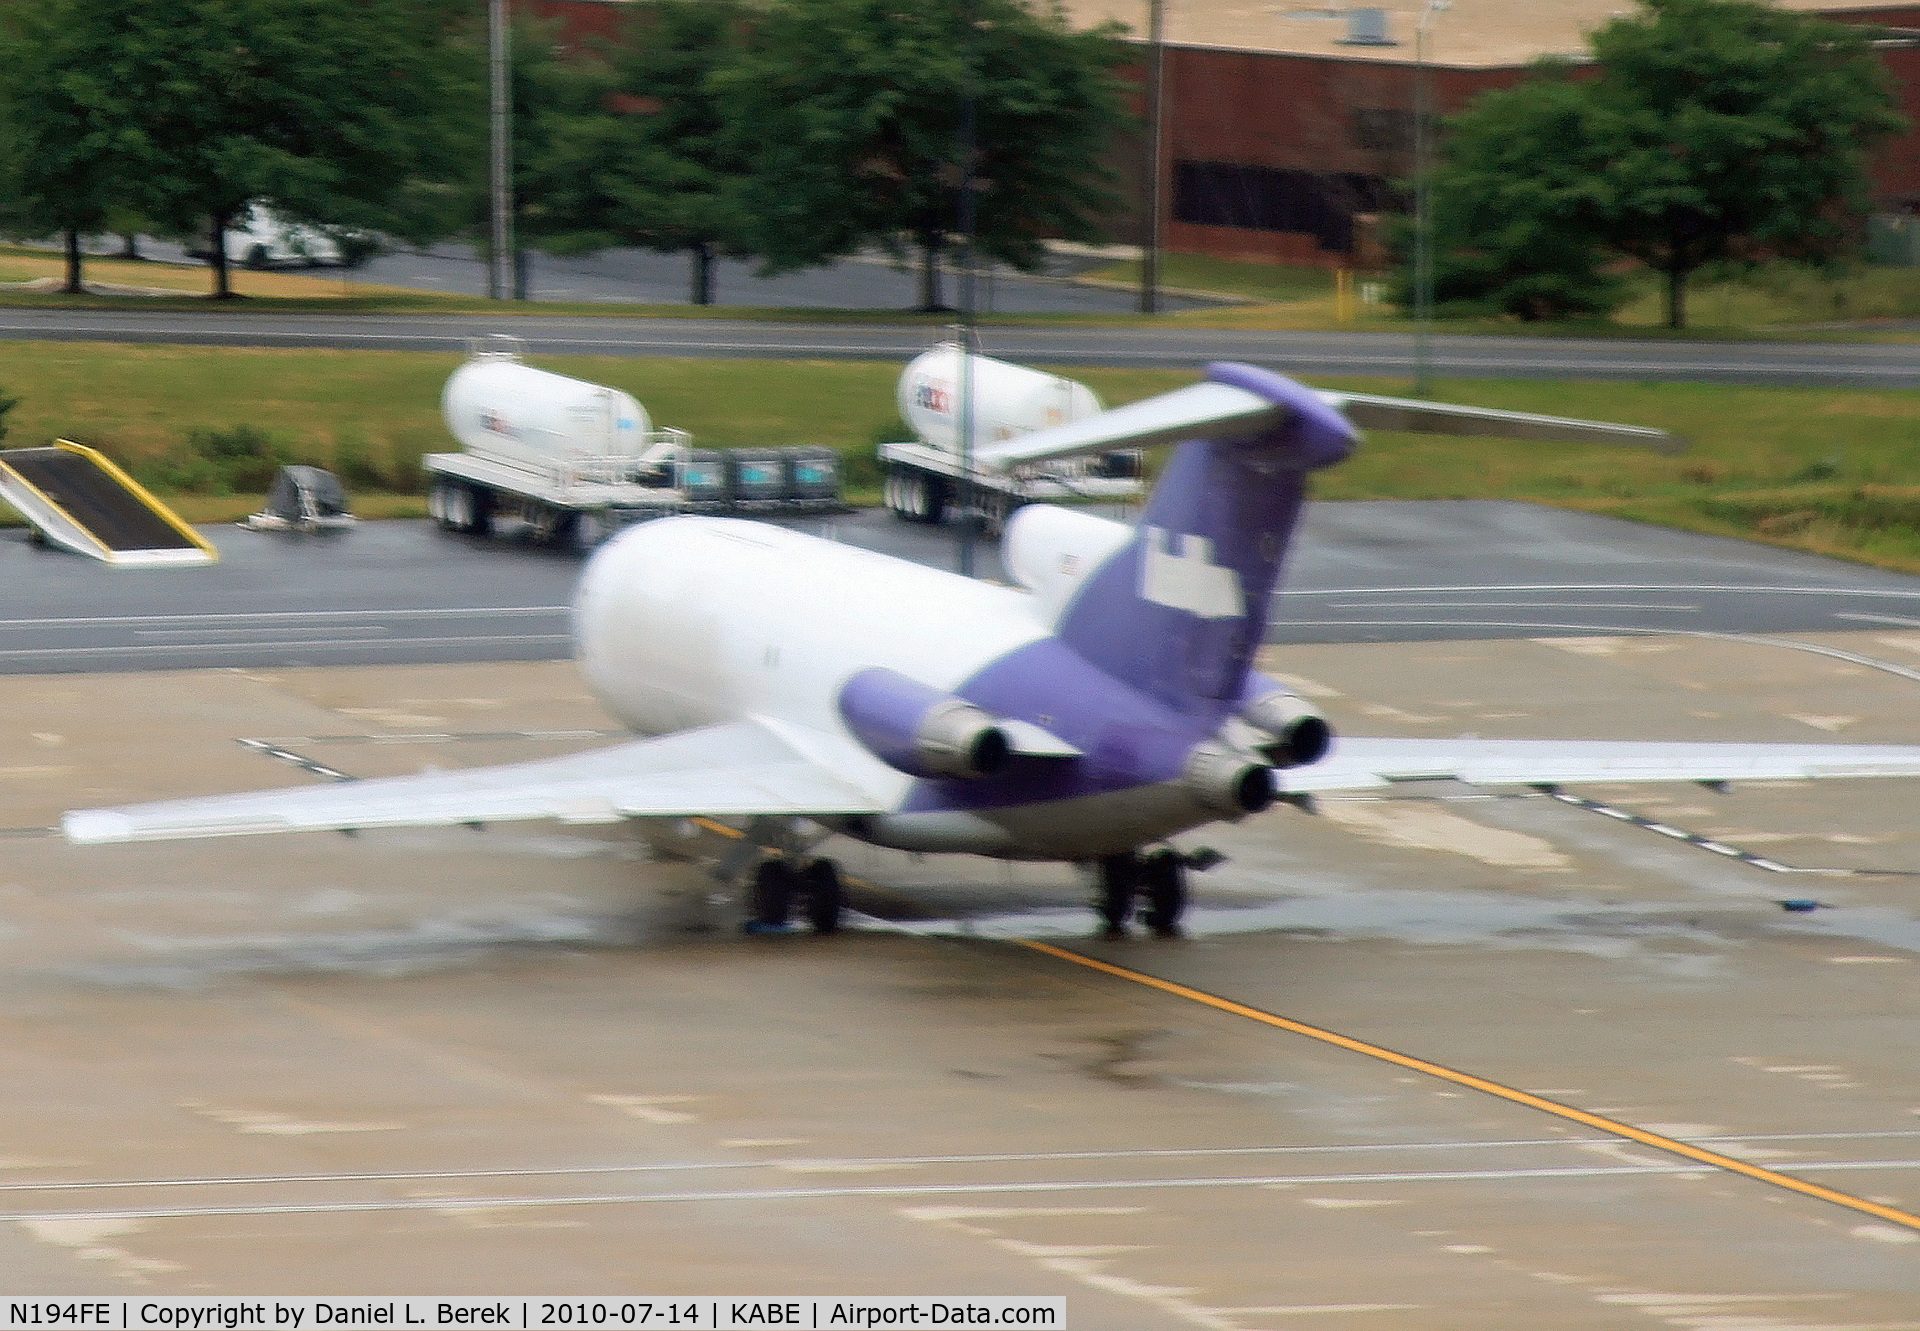 N194FE, 1967 Boeing 727-22 C/N 19143, FedEx donated this aircraft to Lehigh Valley International Airport for ground training.